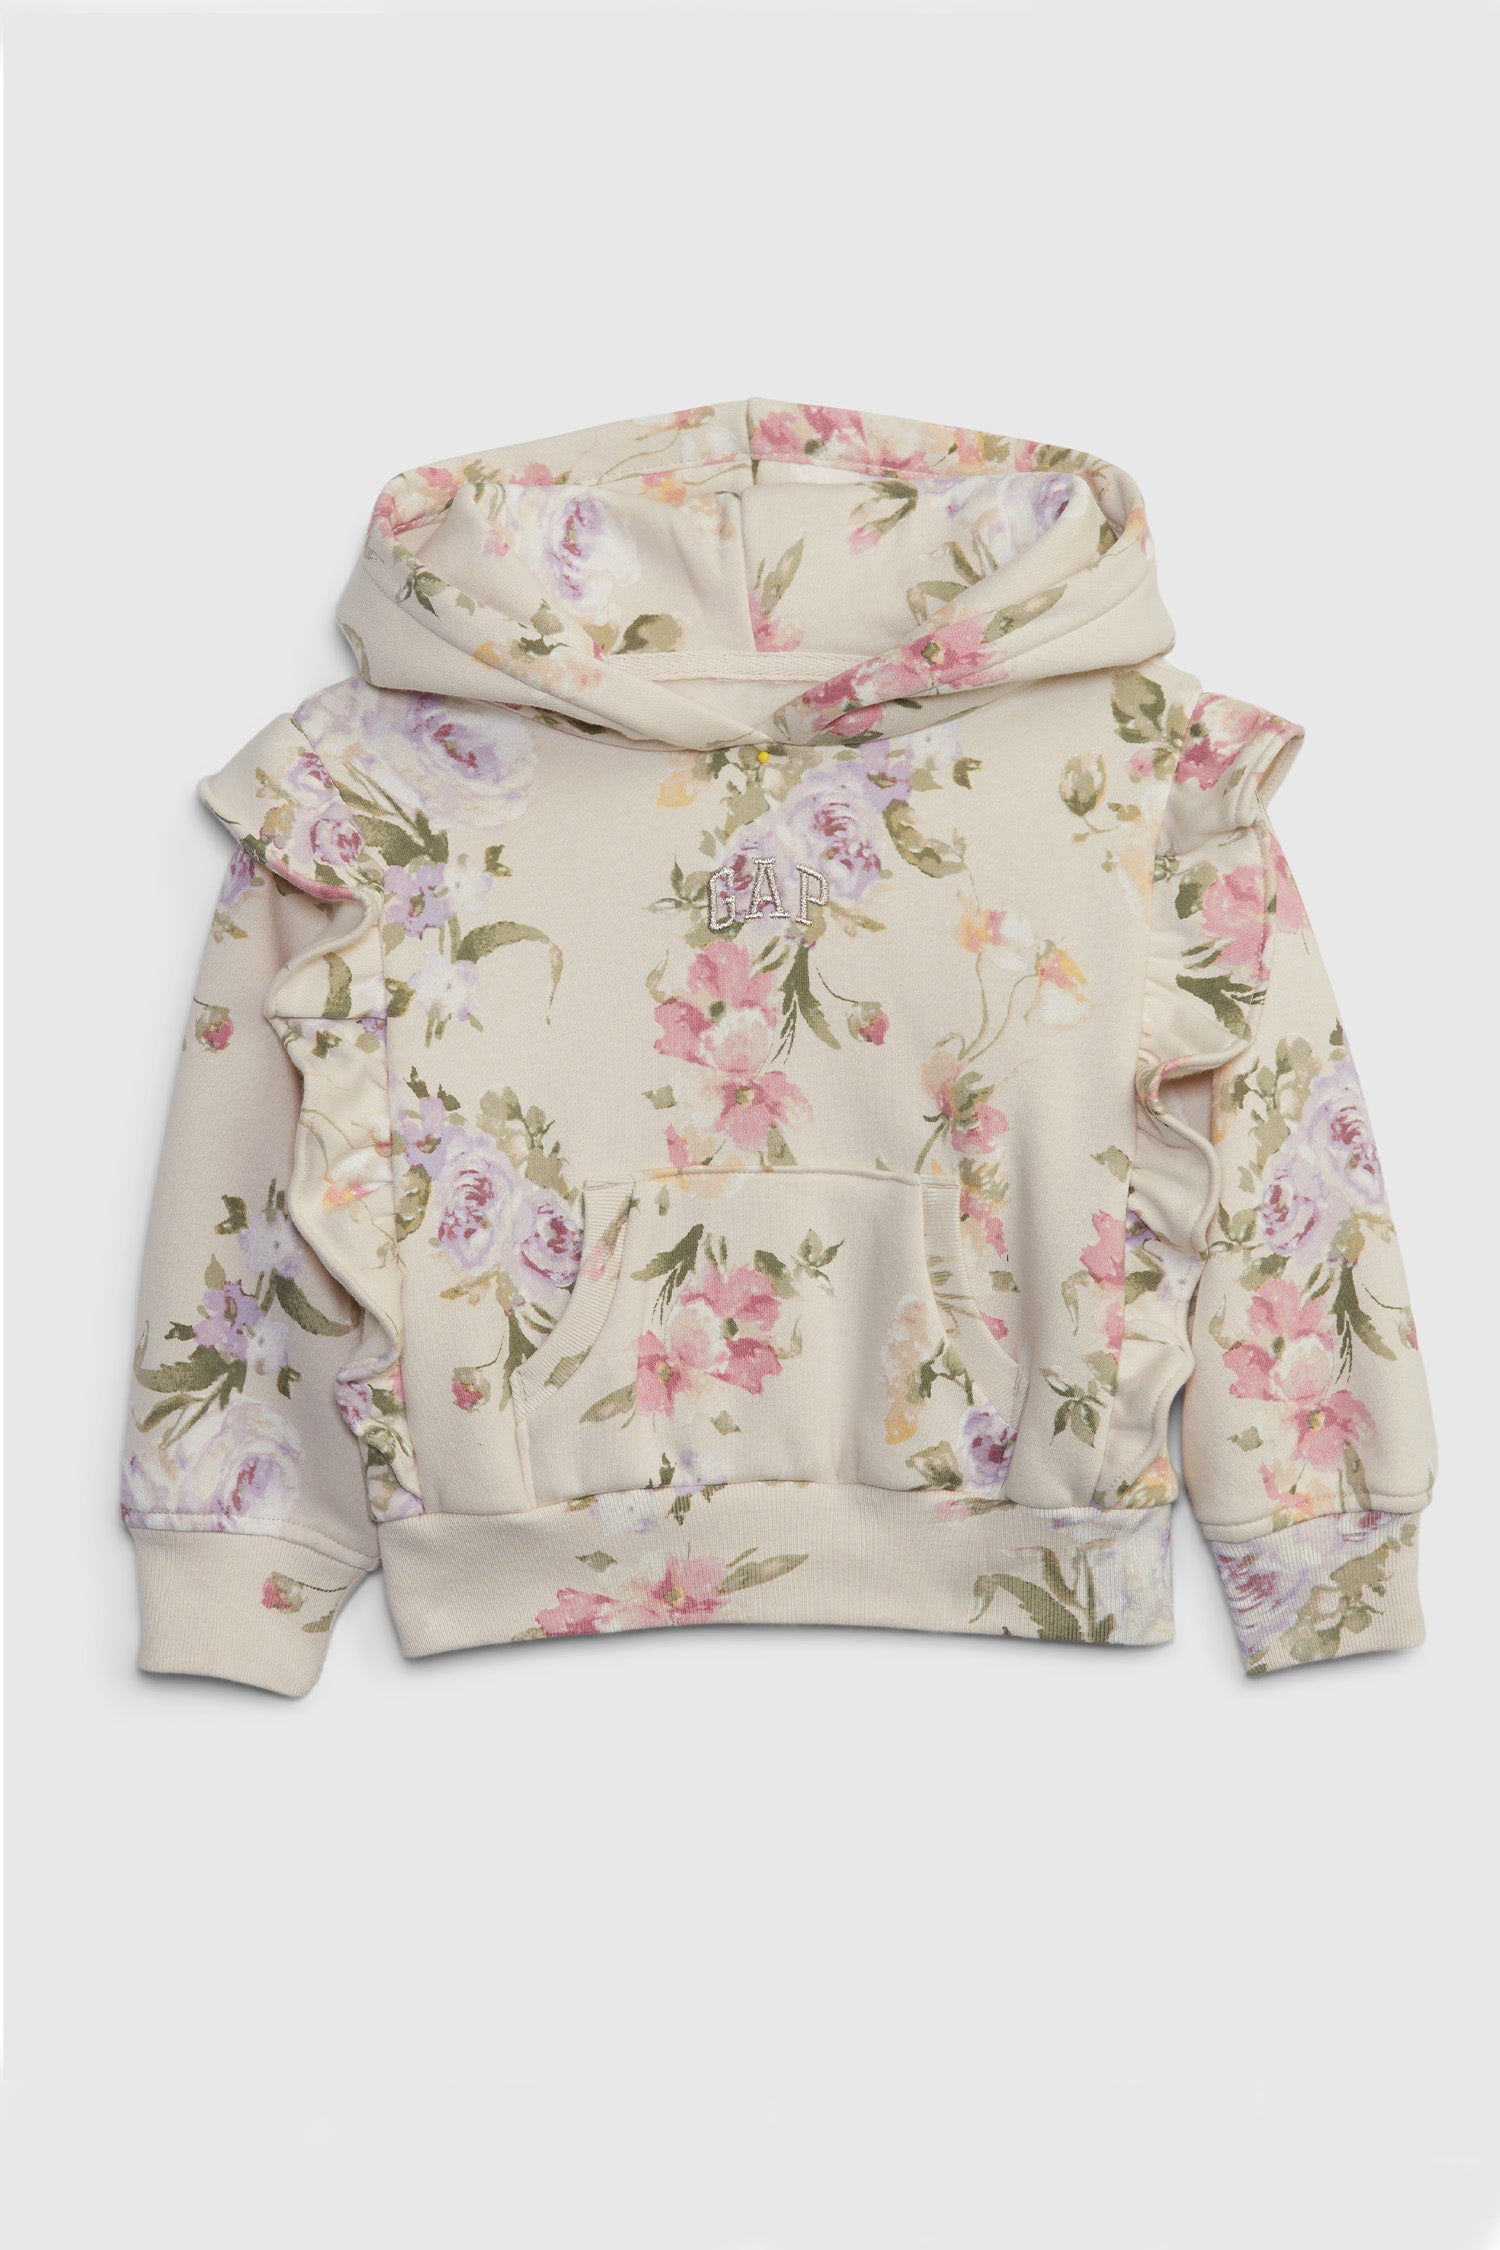 Girl's toddler floral hoodie with GAP logo on chest, ruffle shoulders, and front pocket